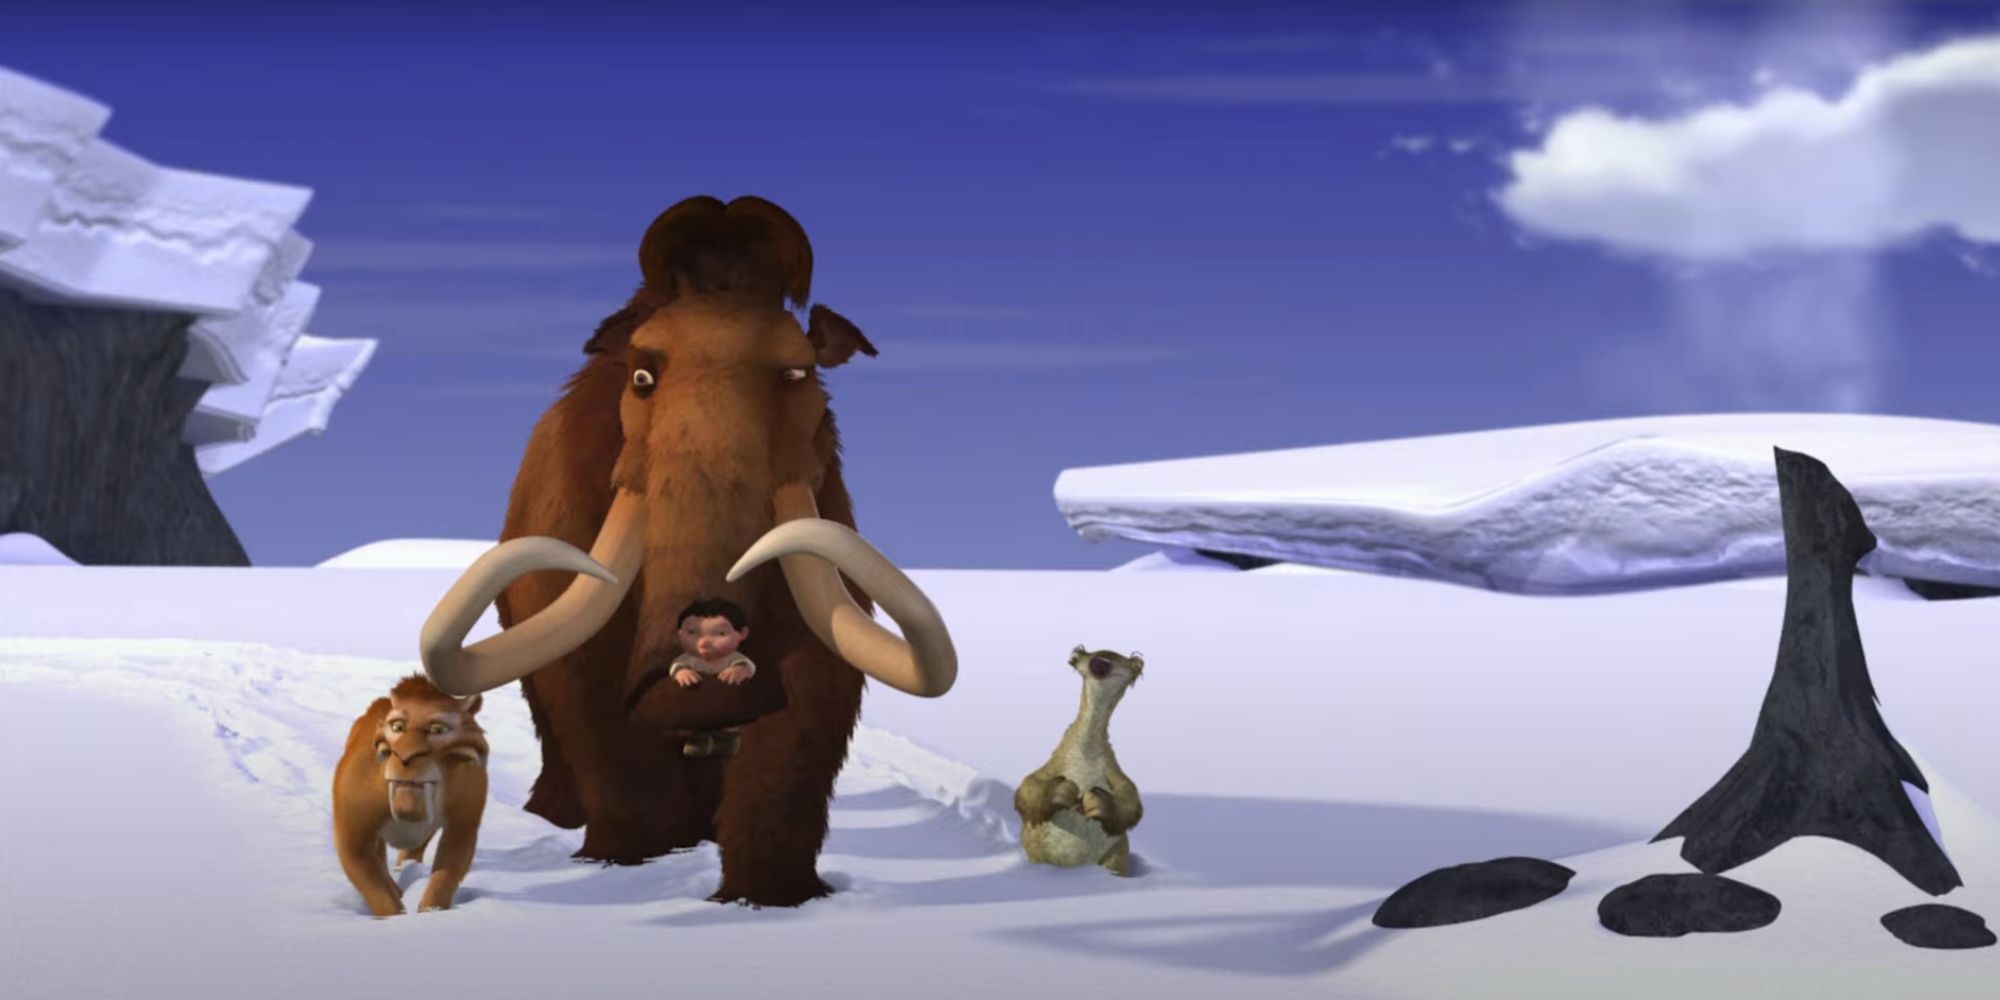 Ice Age (2002) Manny, Sid and Diego